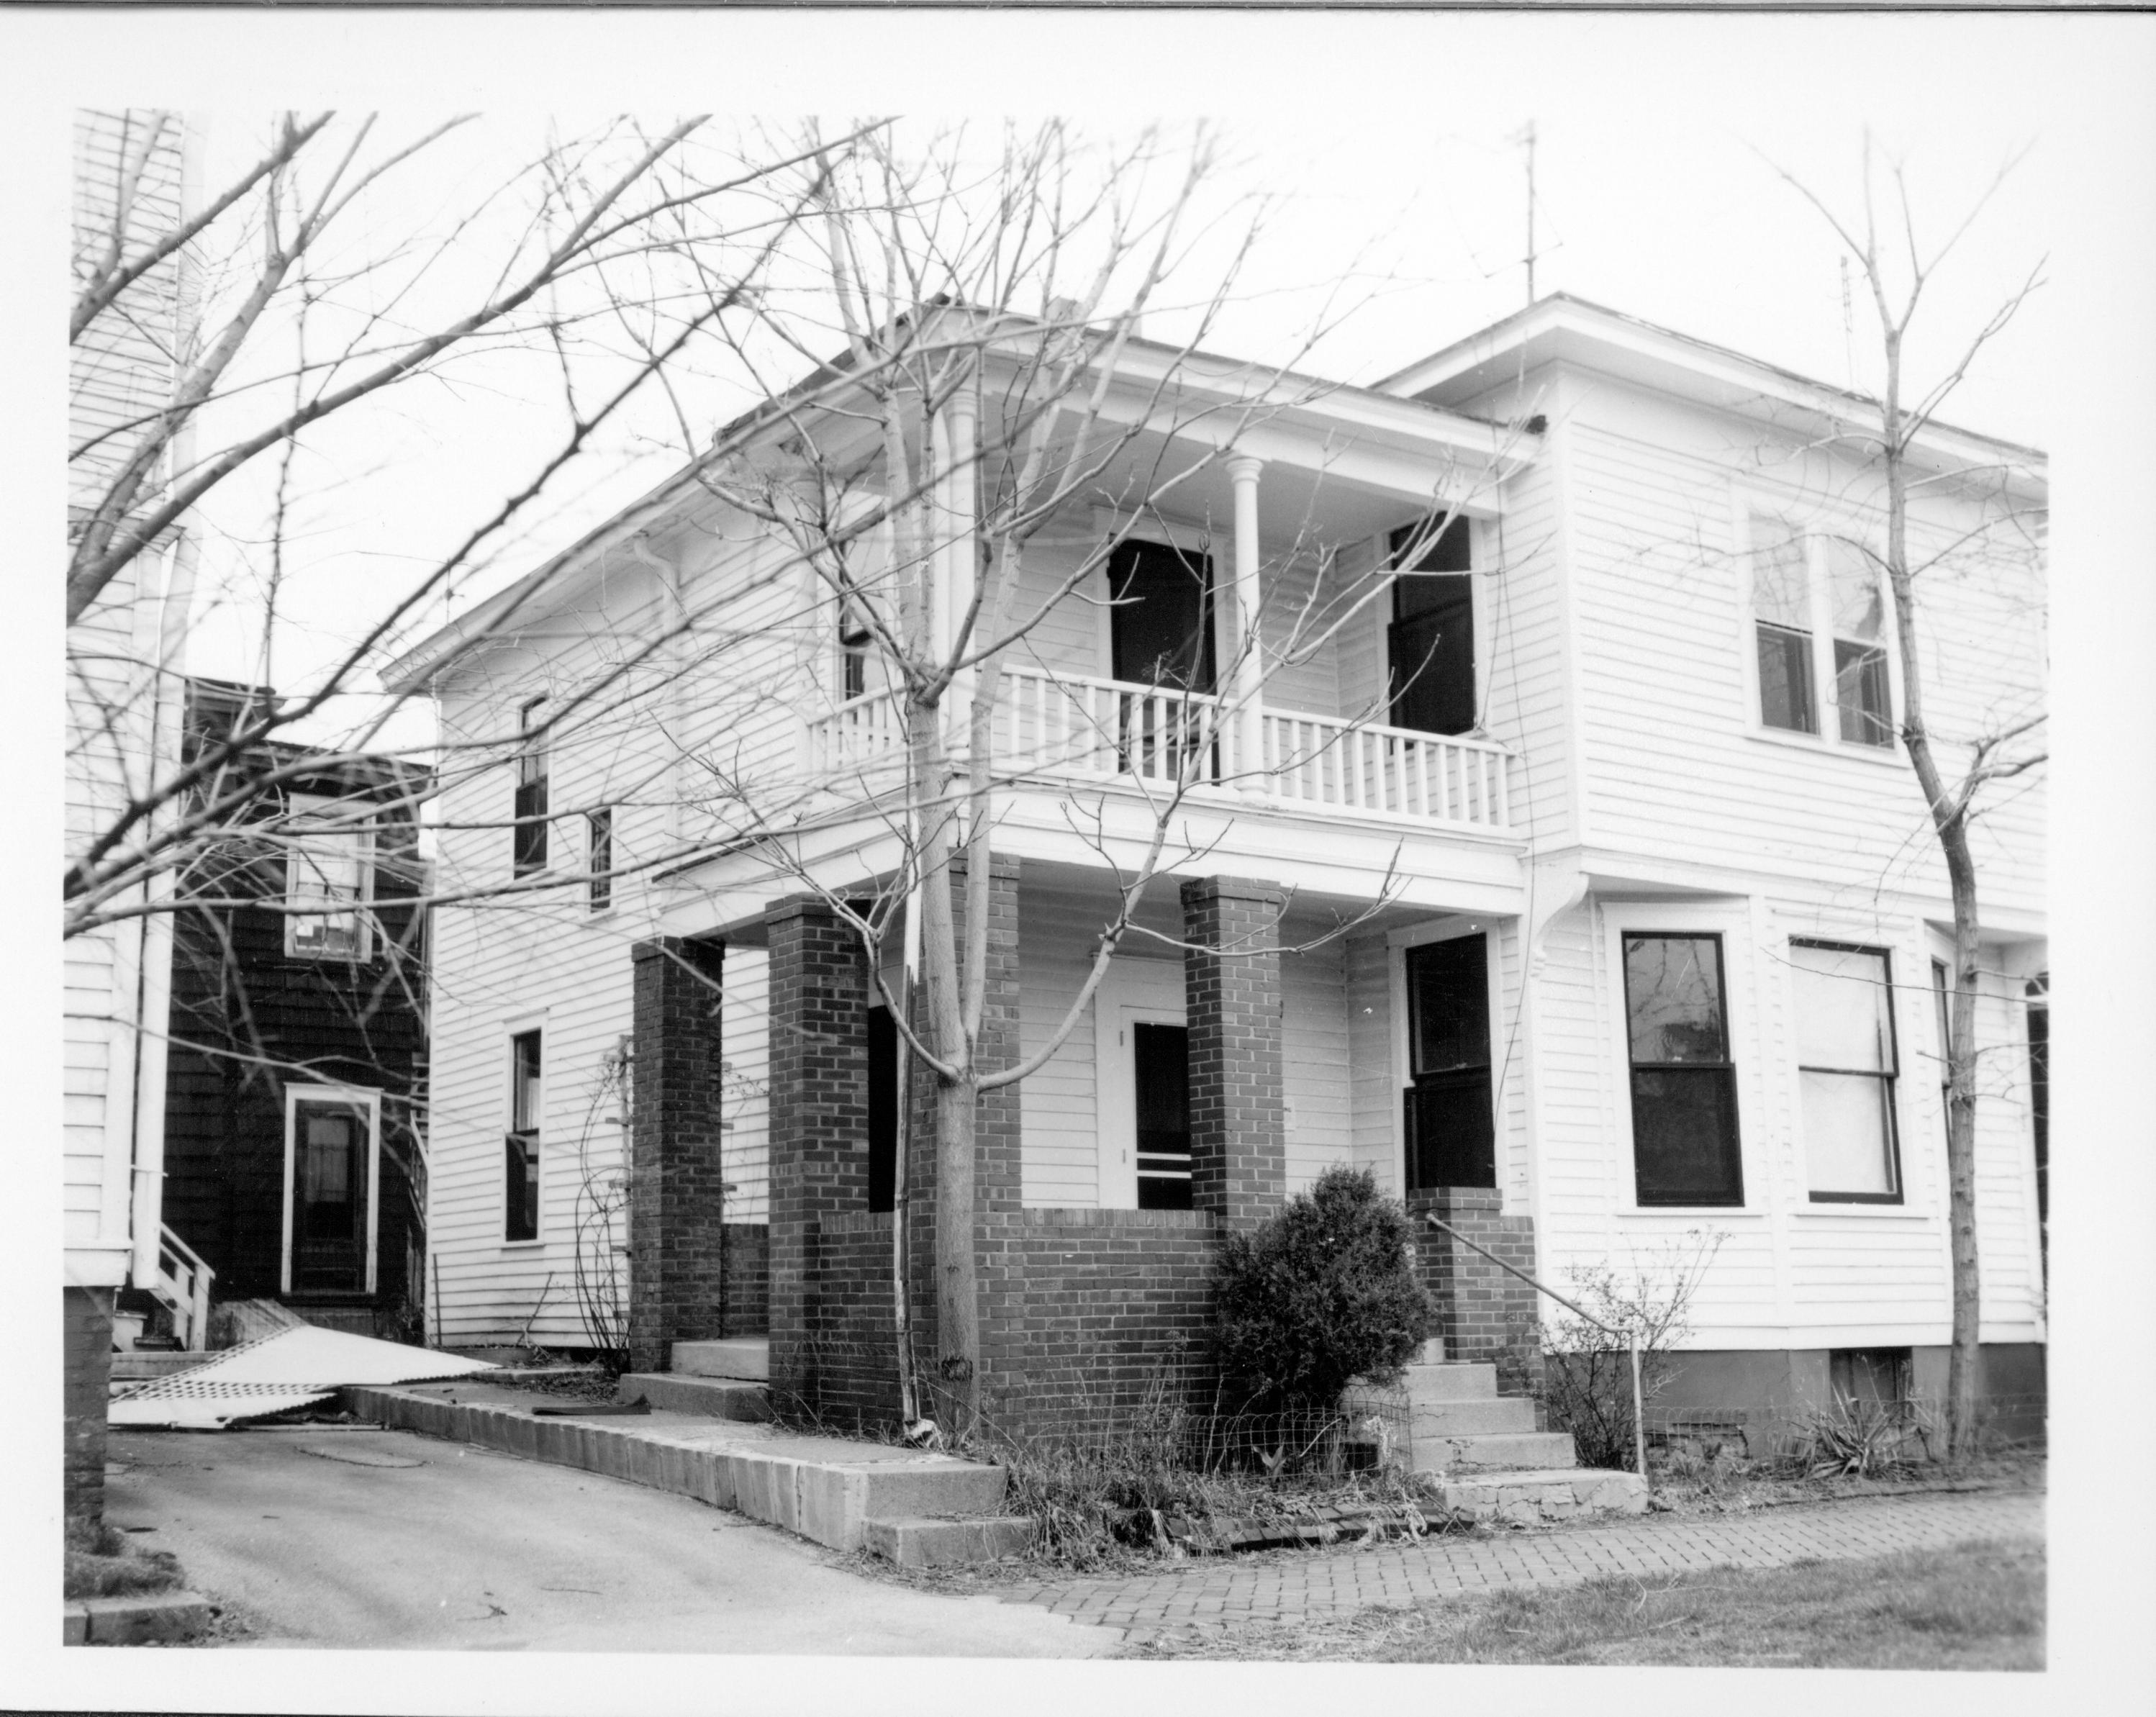 Duplex apartment owned by William Sheeham, Block 7, Lot 8 along Jackson Street.  Area is Visitor Center now. House on left owned by William Hermes, Building in background owned by Eleanor Pruett Looking Northeast from Jackson Street Sheeham, Hermes, Pruett, Jackson Street, Visitor Center